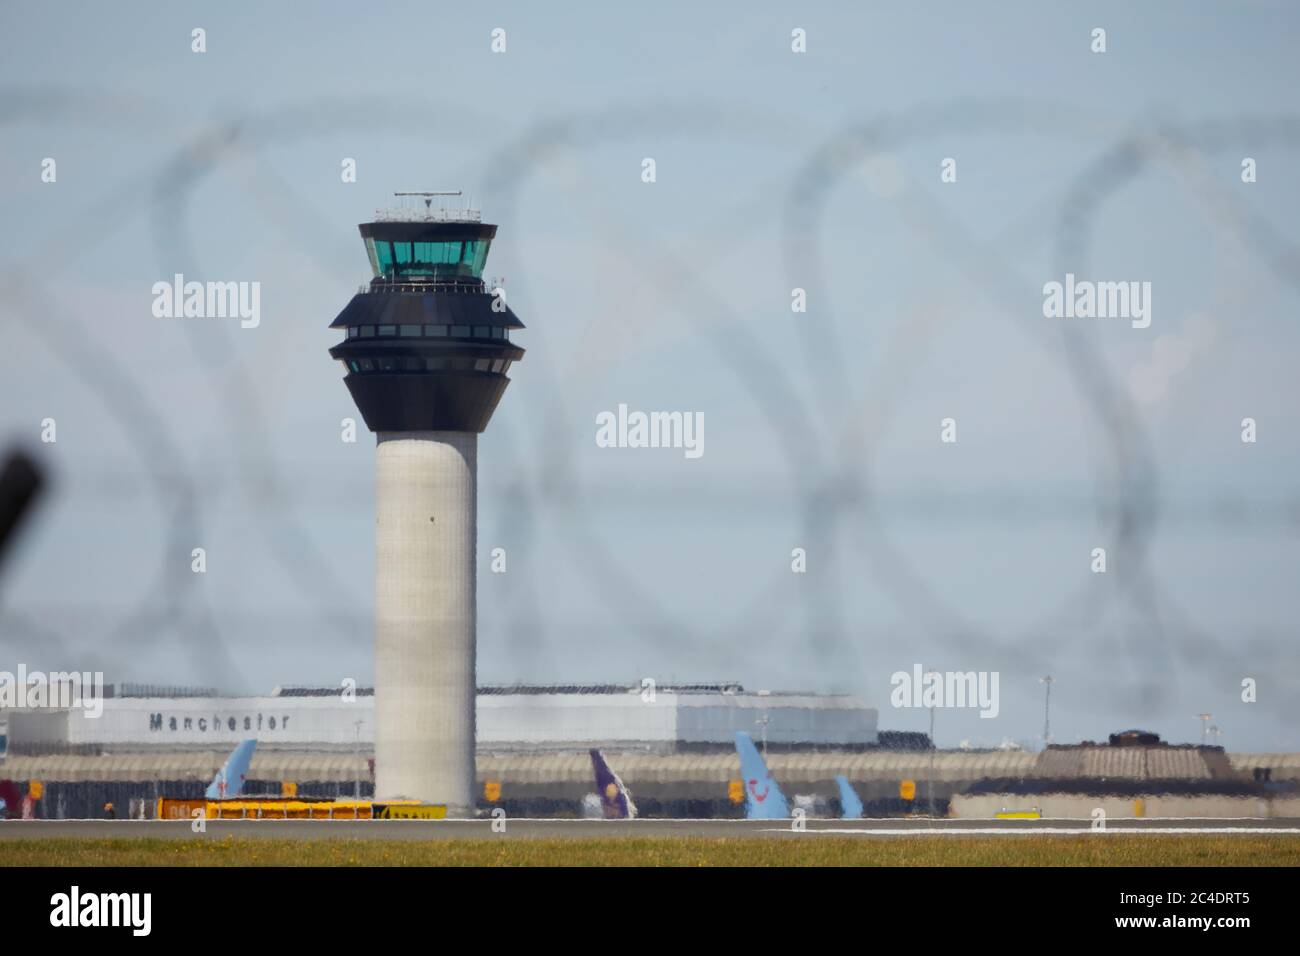 Manchester Airport air traffic control tower through barbed wire of the perimeter fence Stock Photo